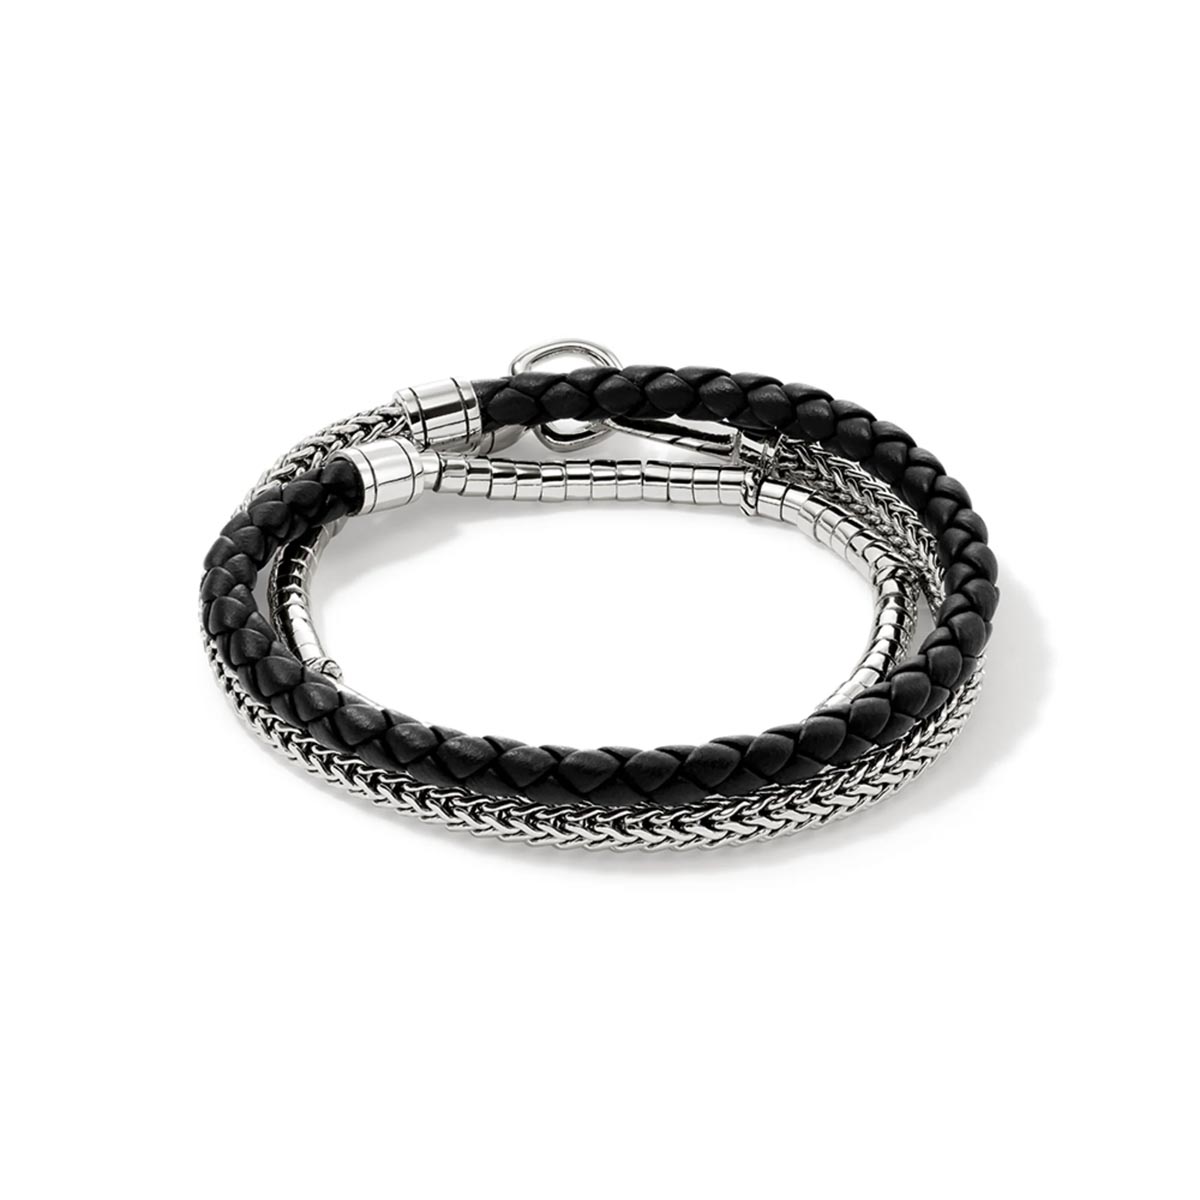 John Hardy Classic Chain Collection Heishi Triple Wrap Bracelet in Sterling Silver and Black Leather